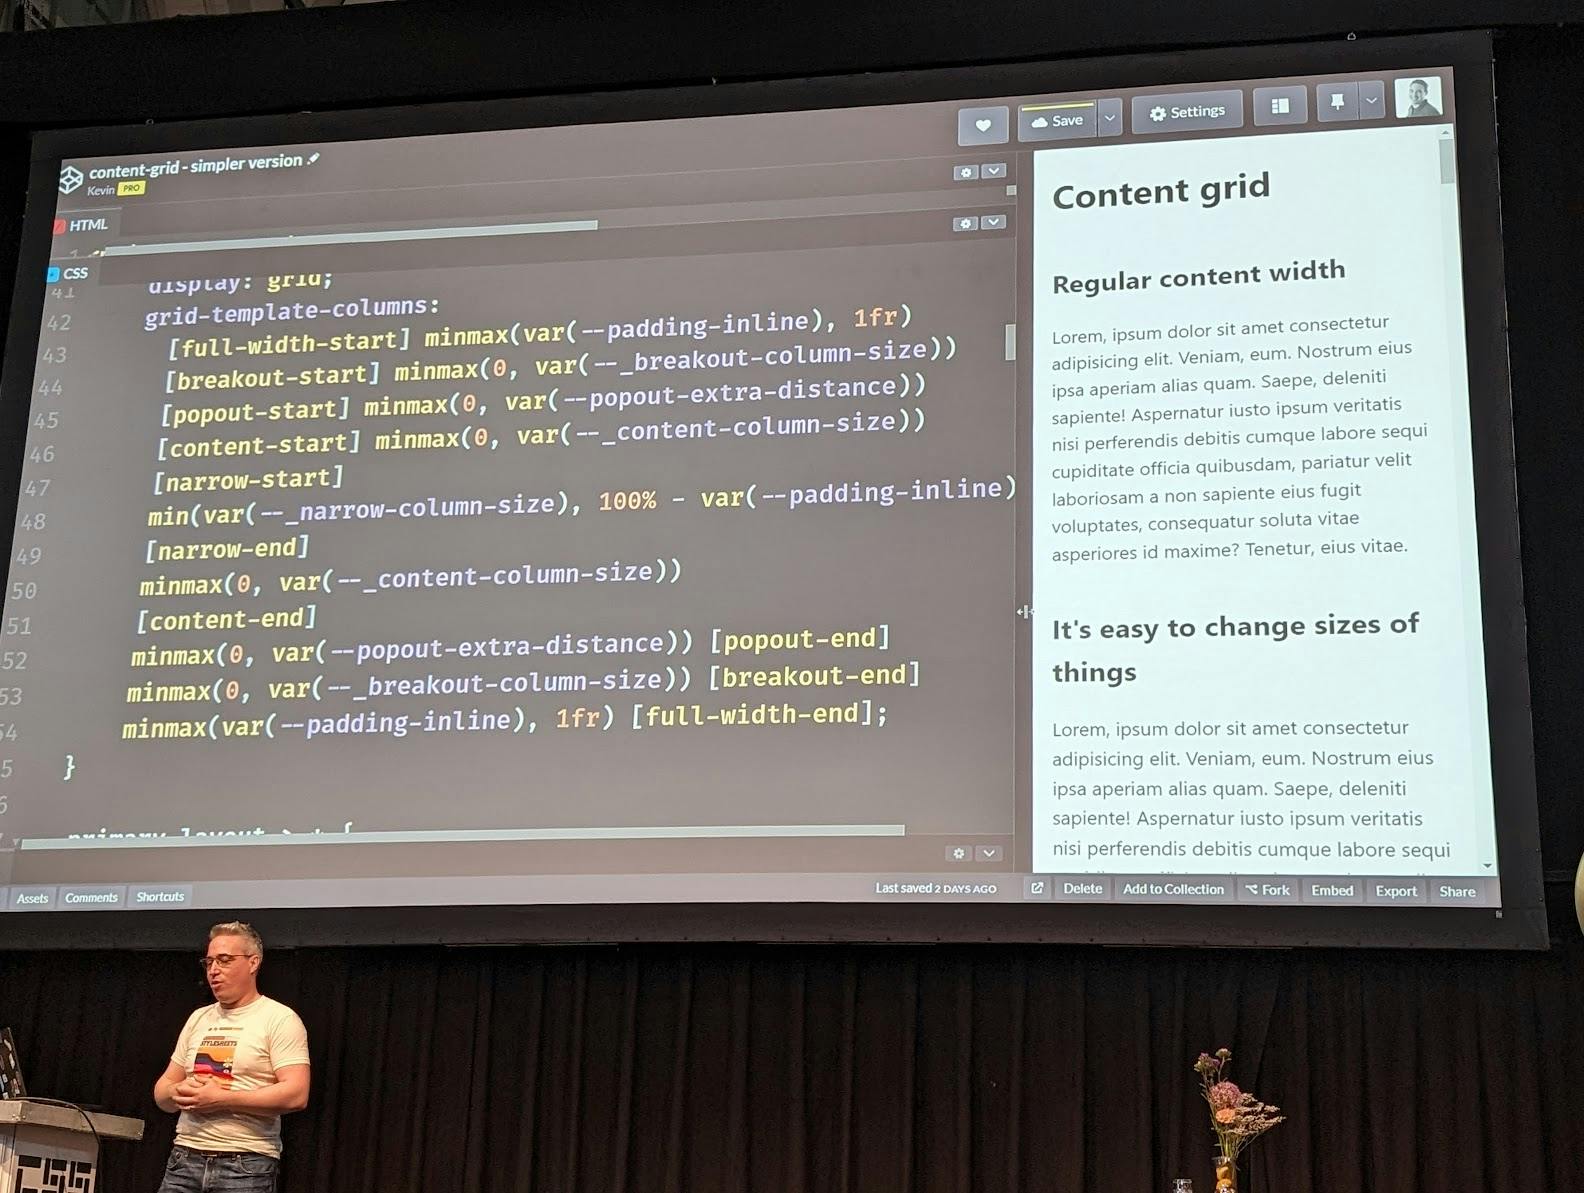 Kevin Powell showing some over-engineered grid-template-columns in CSS on a slide